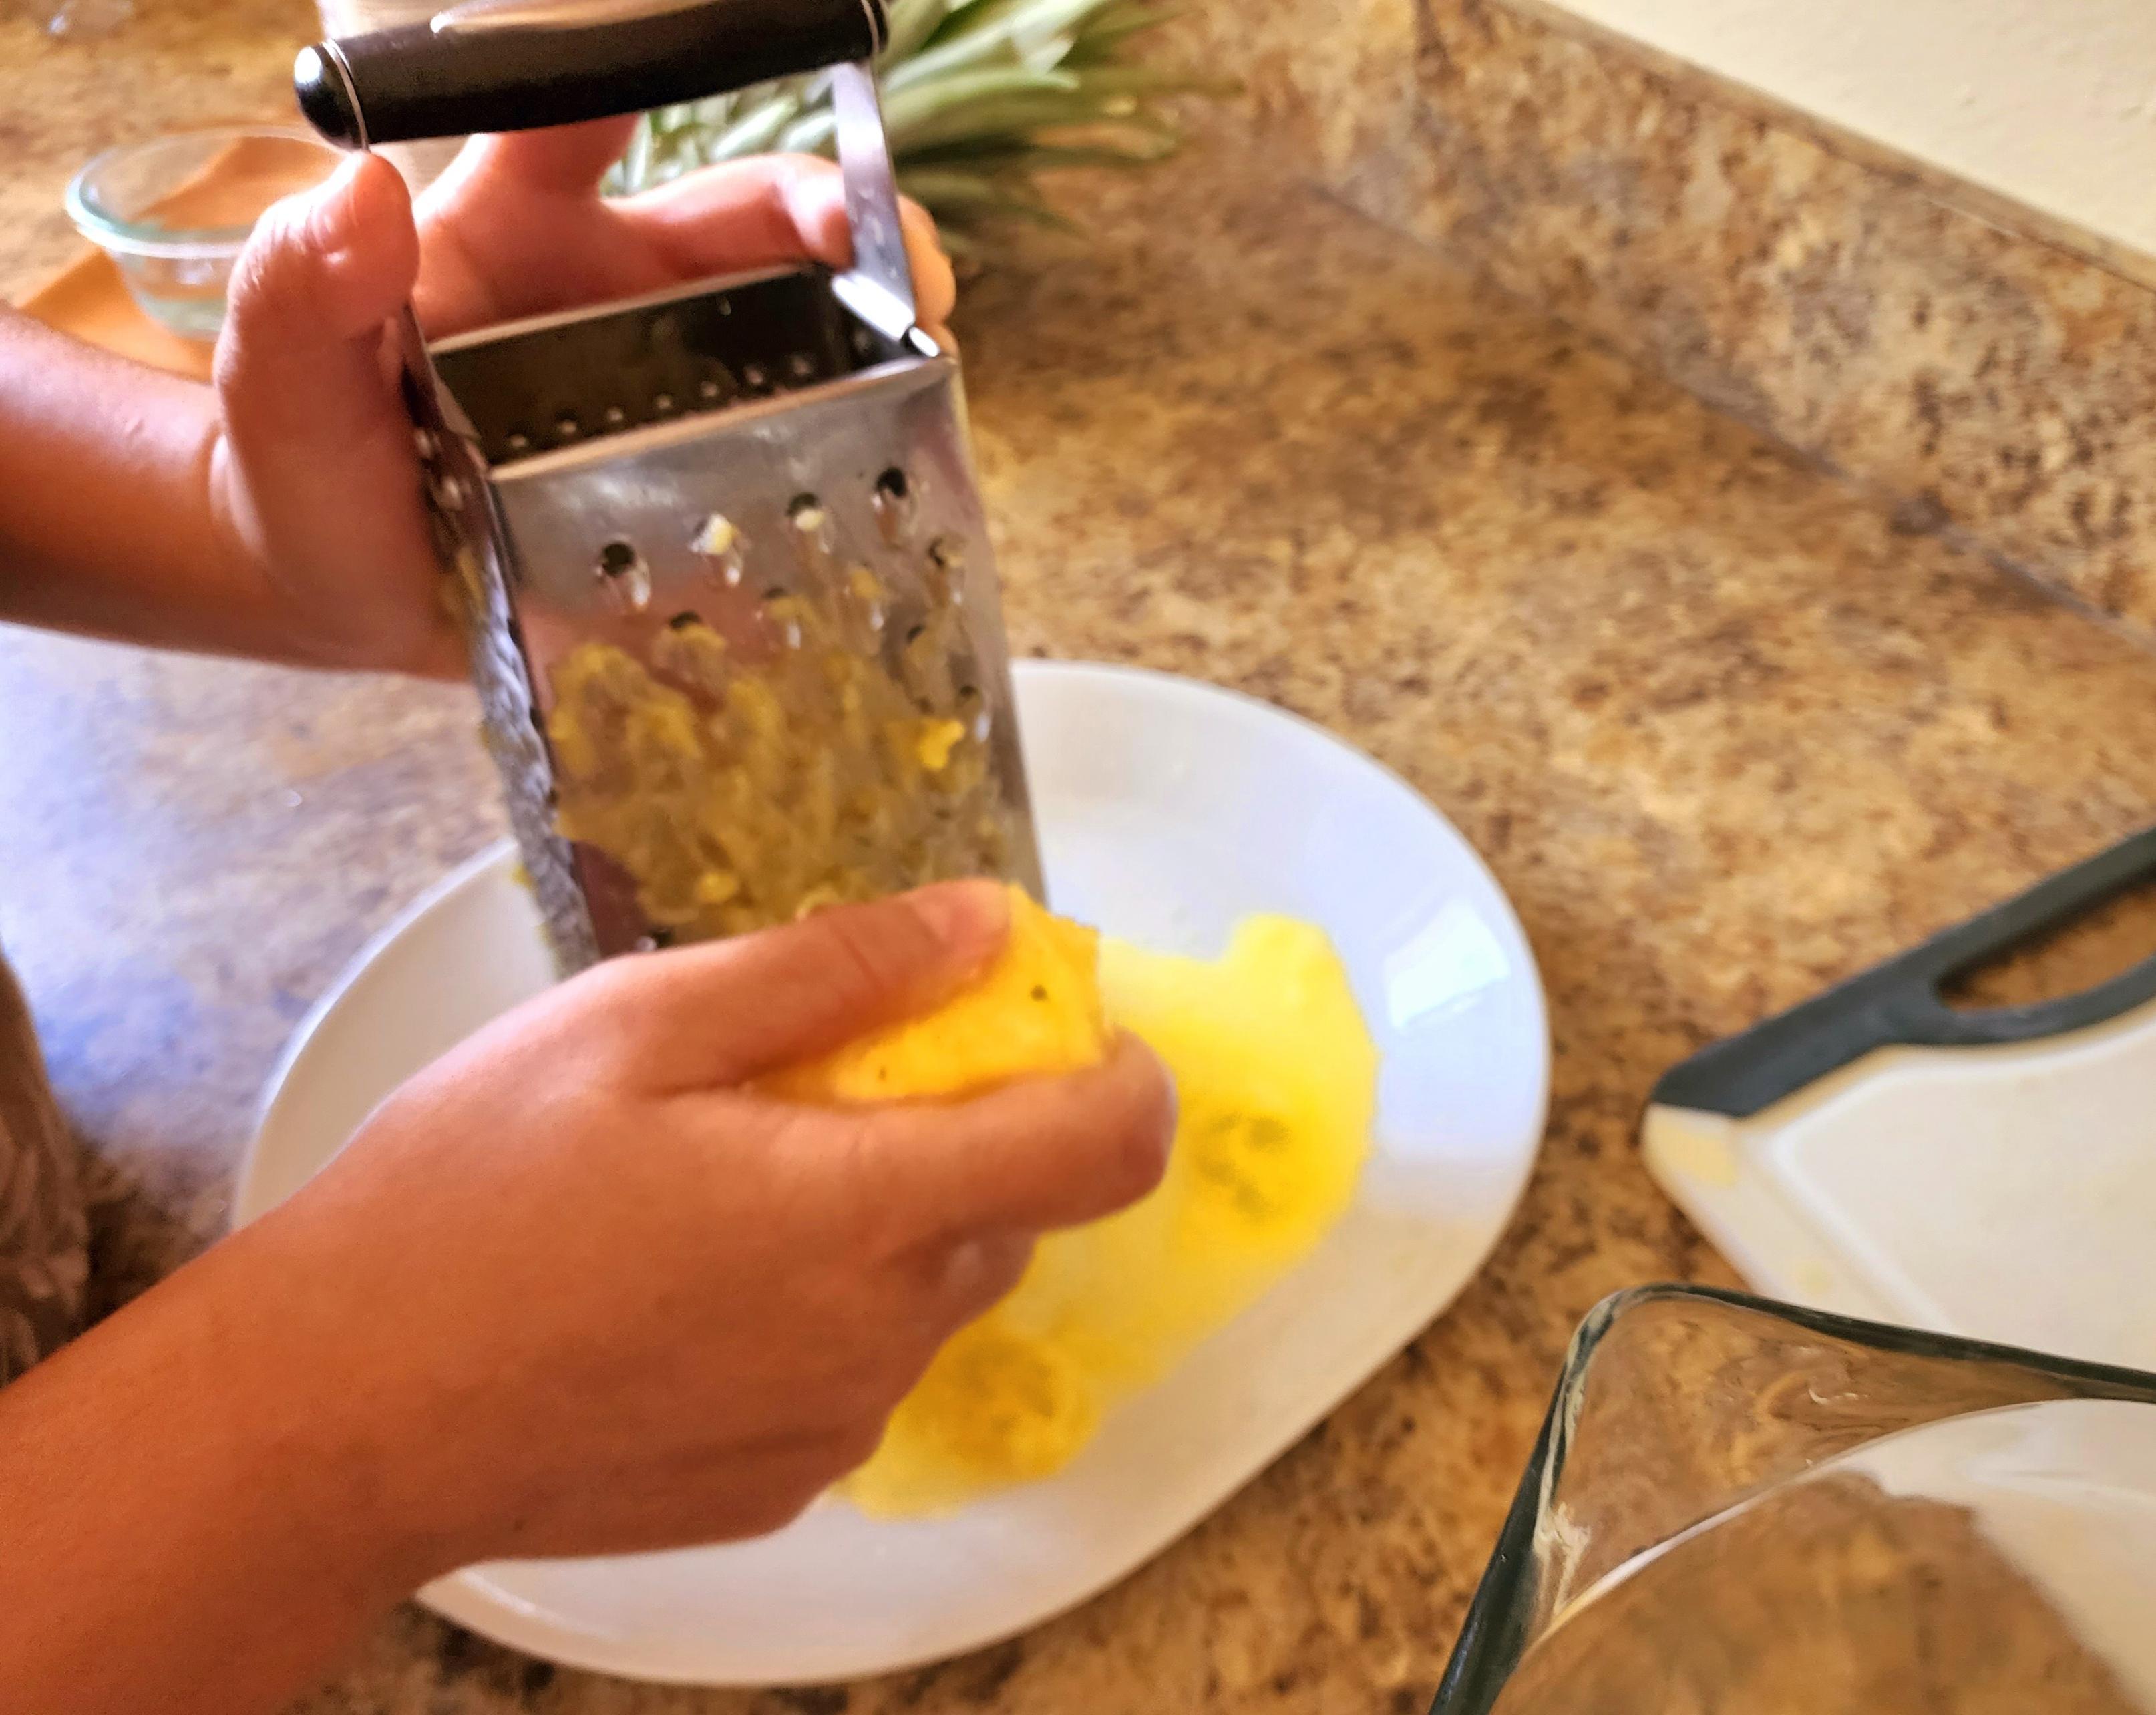 photo of grating the pineapple to make delicious vaifala.